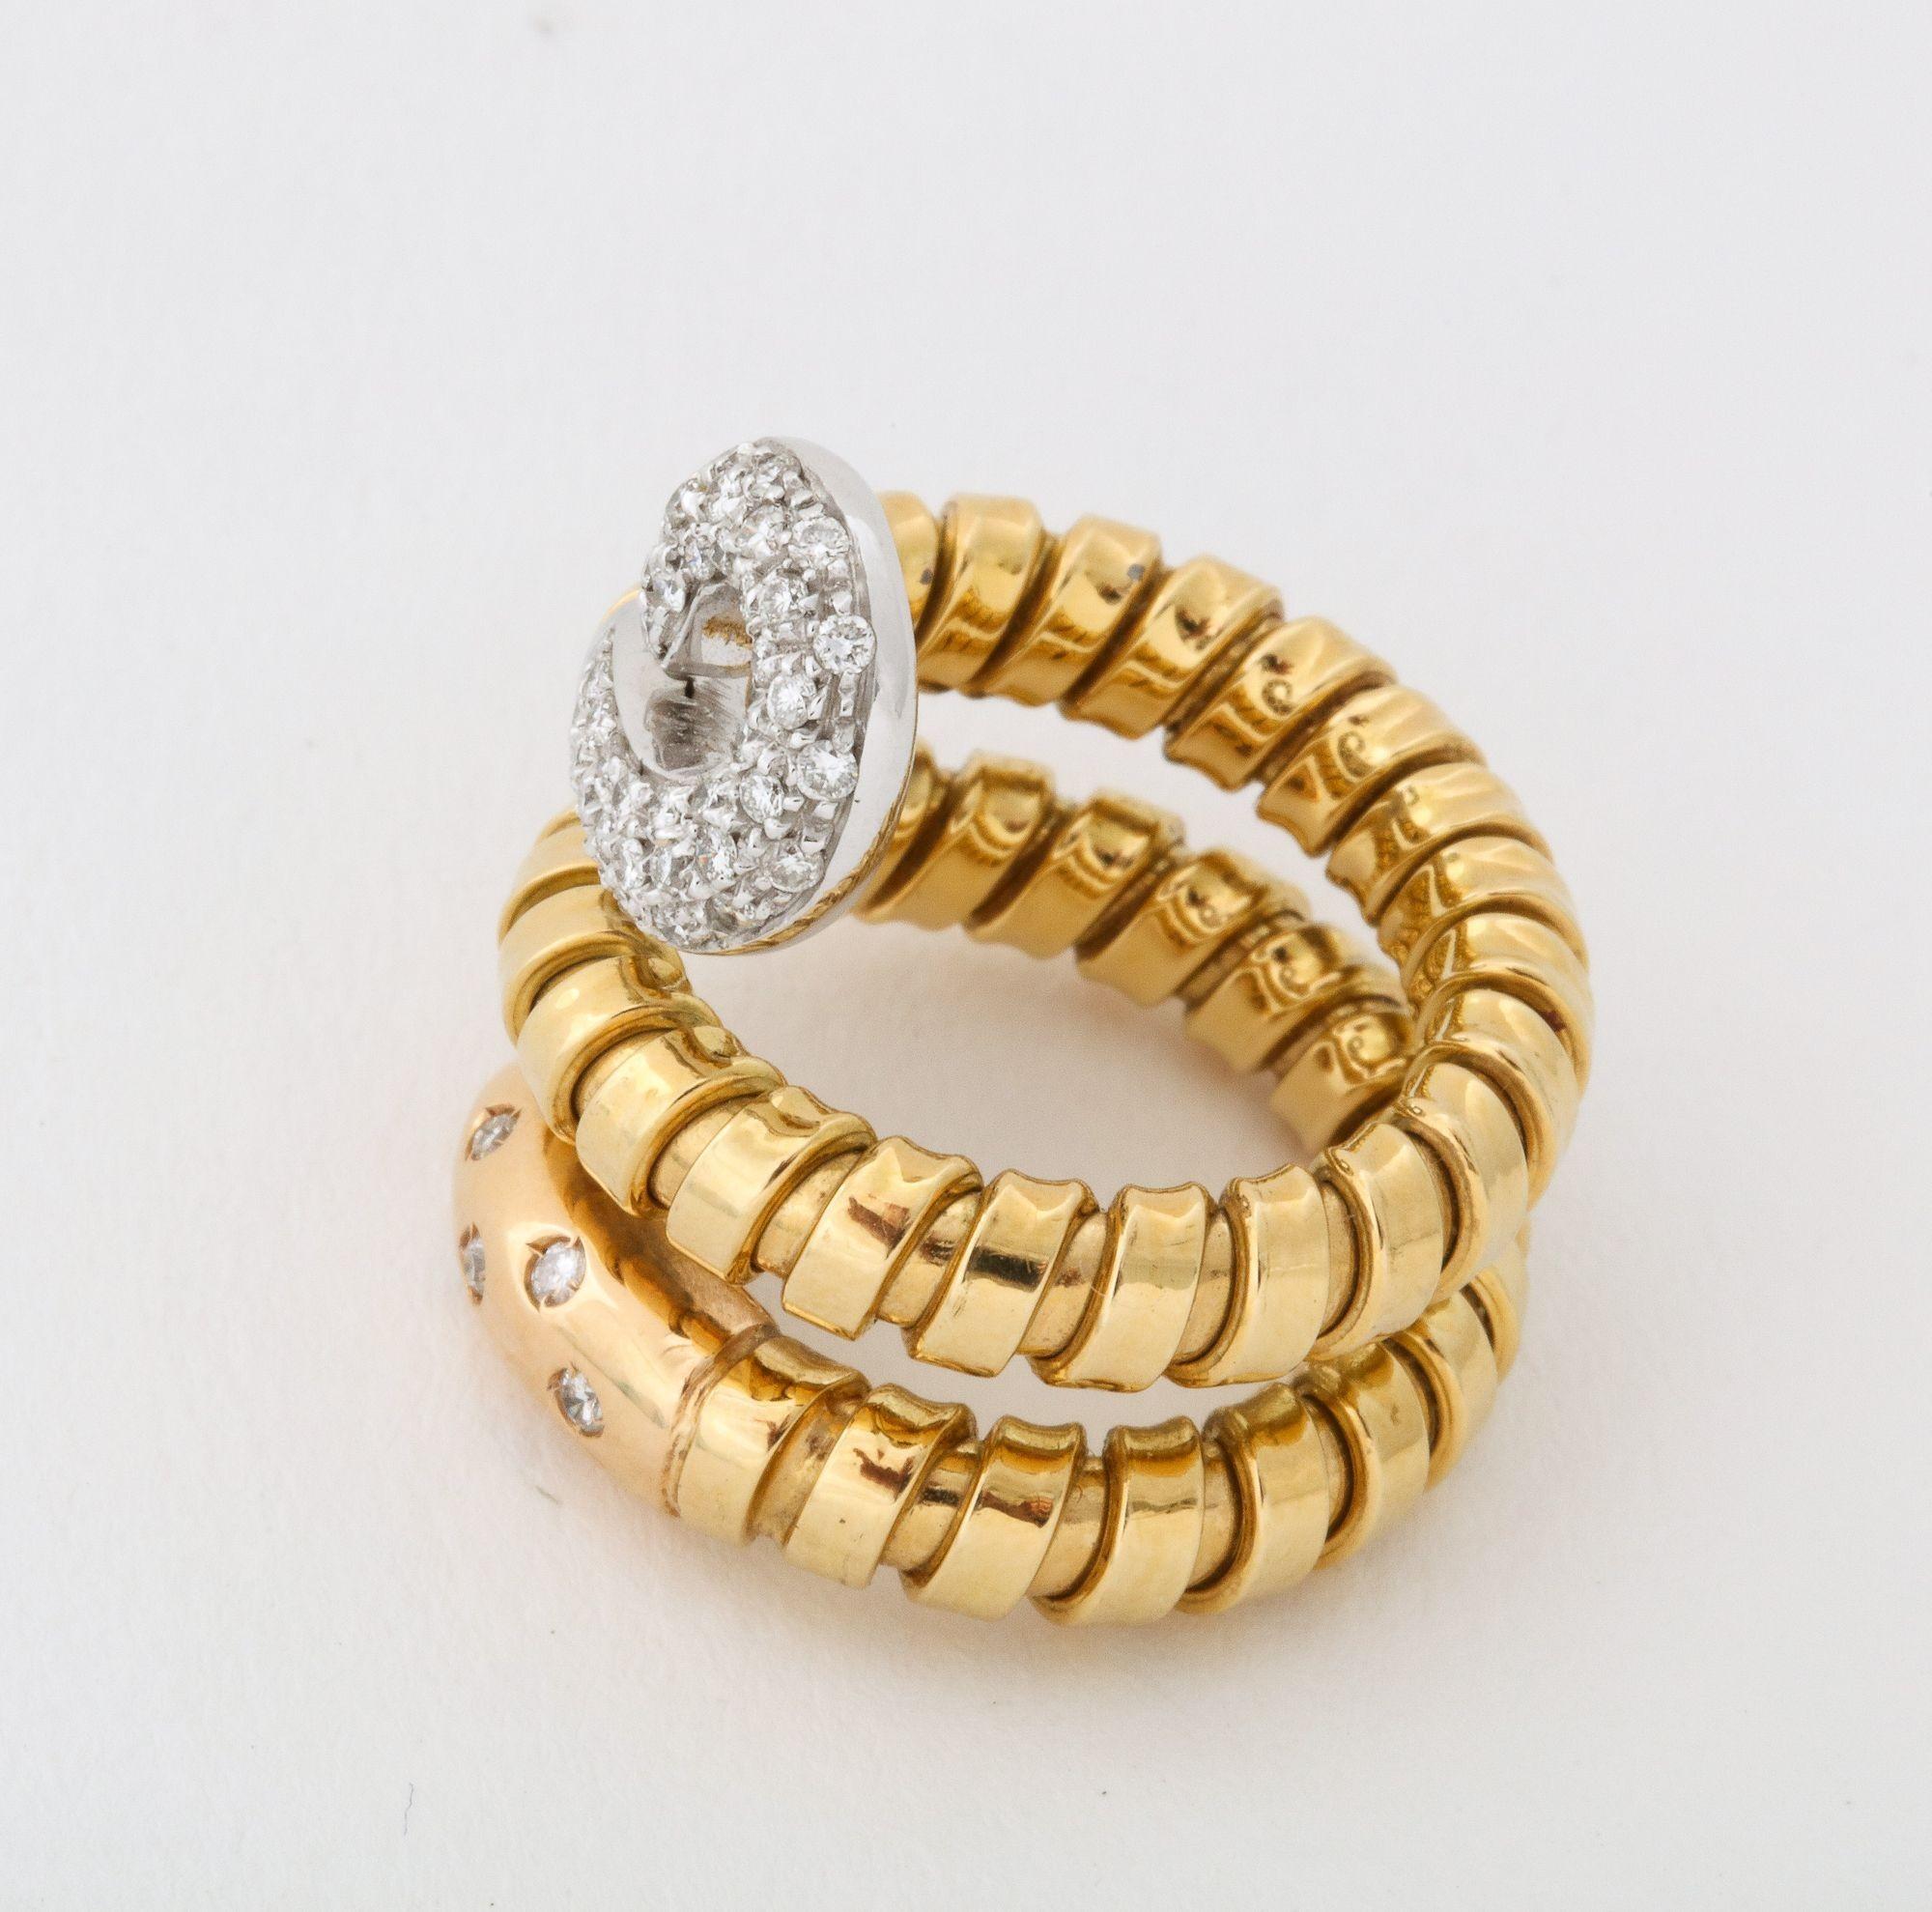  Gold Snake  Tubogas Ring With Diamond Head And Tail 18K For Sale 2